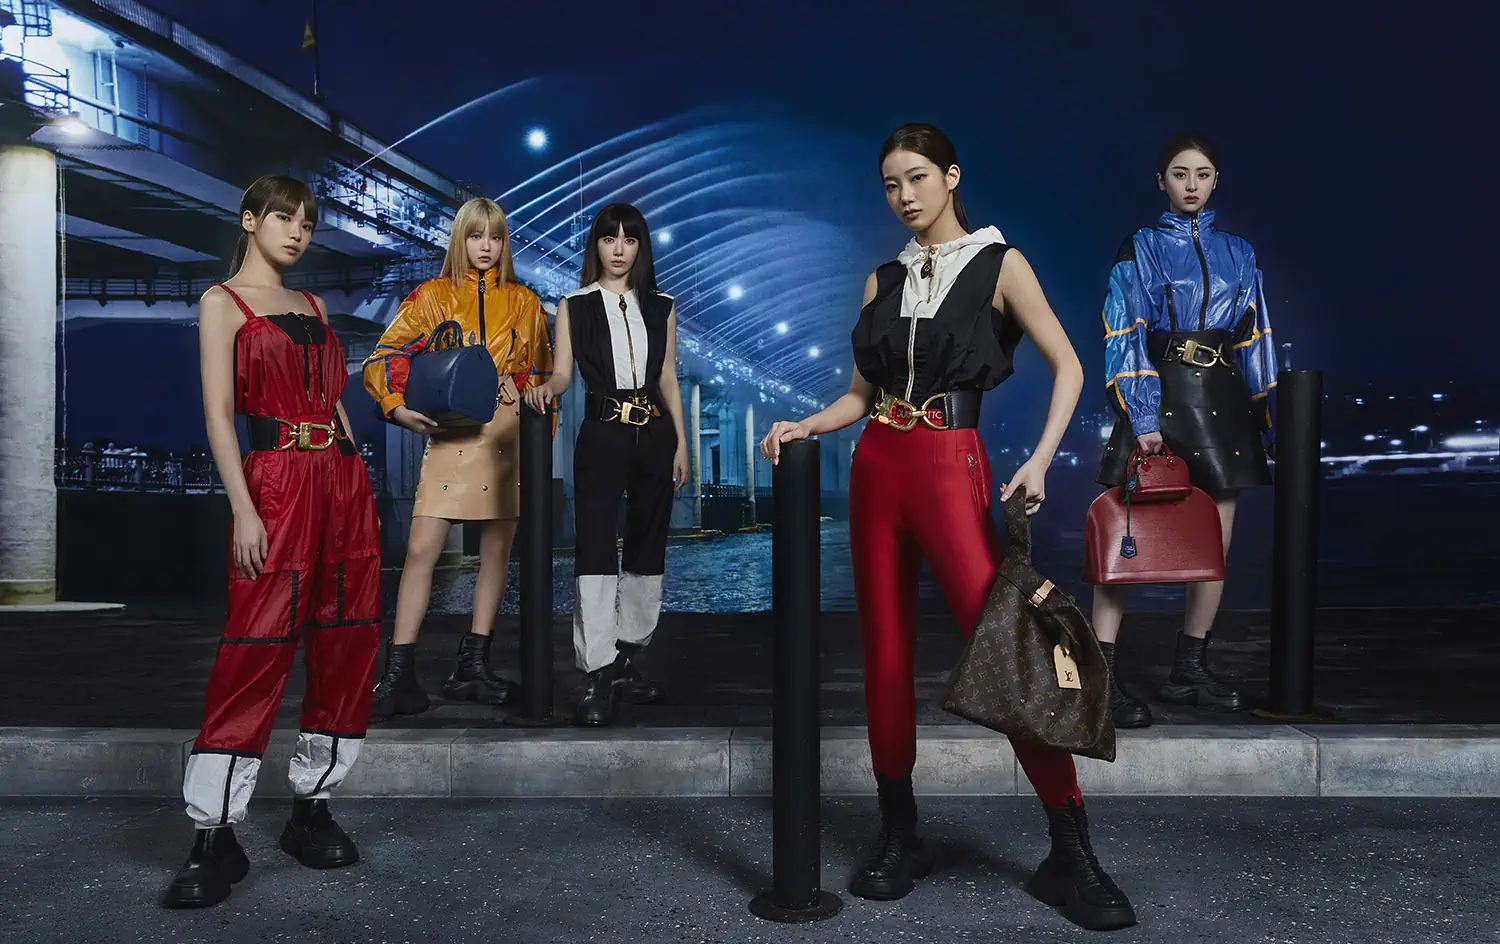 Louis Vuitton Campaign Is An Homage To Its Brand Ambassadors